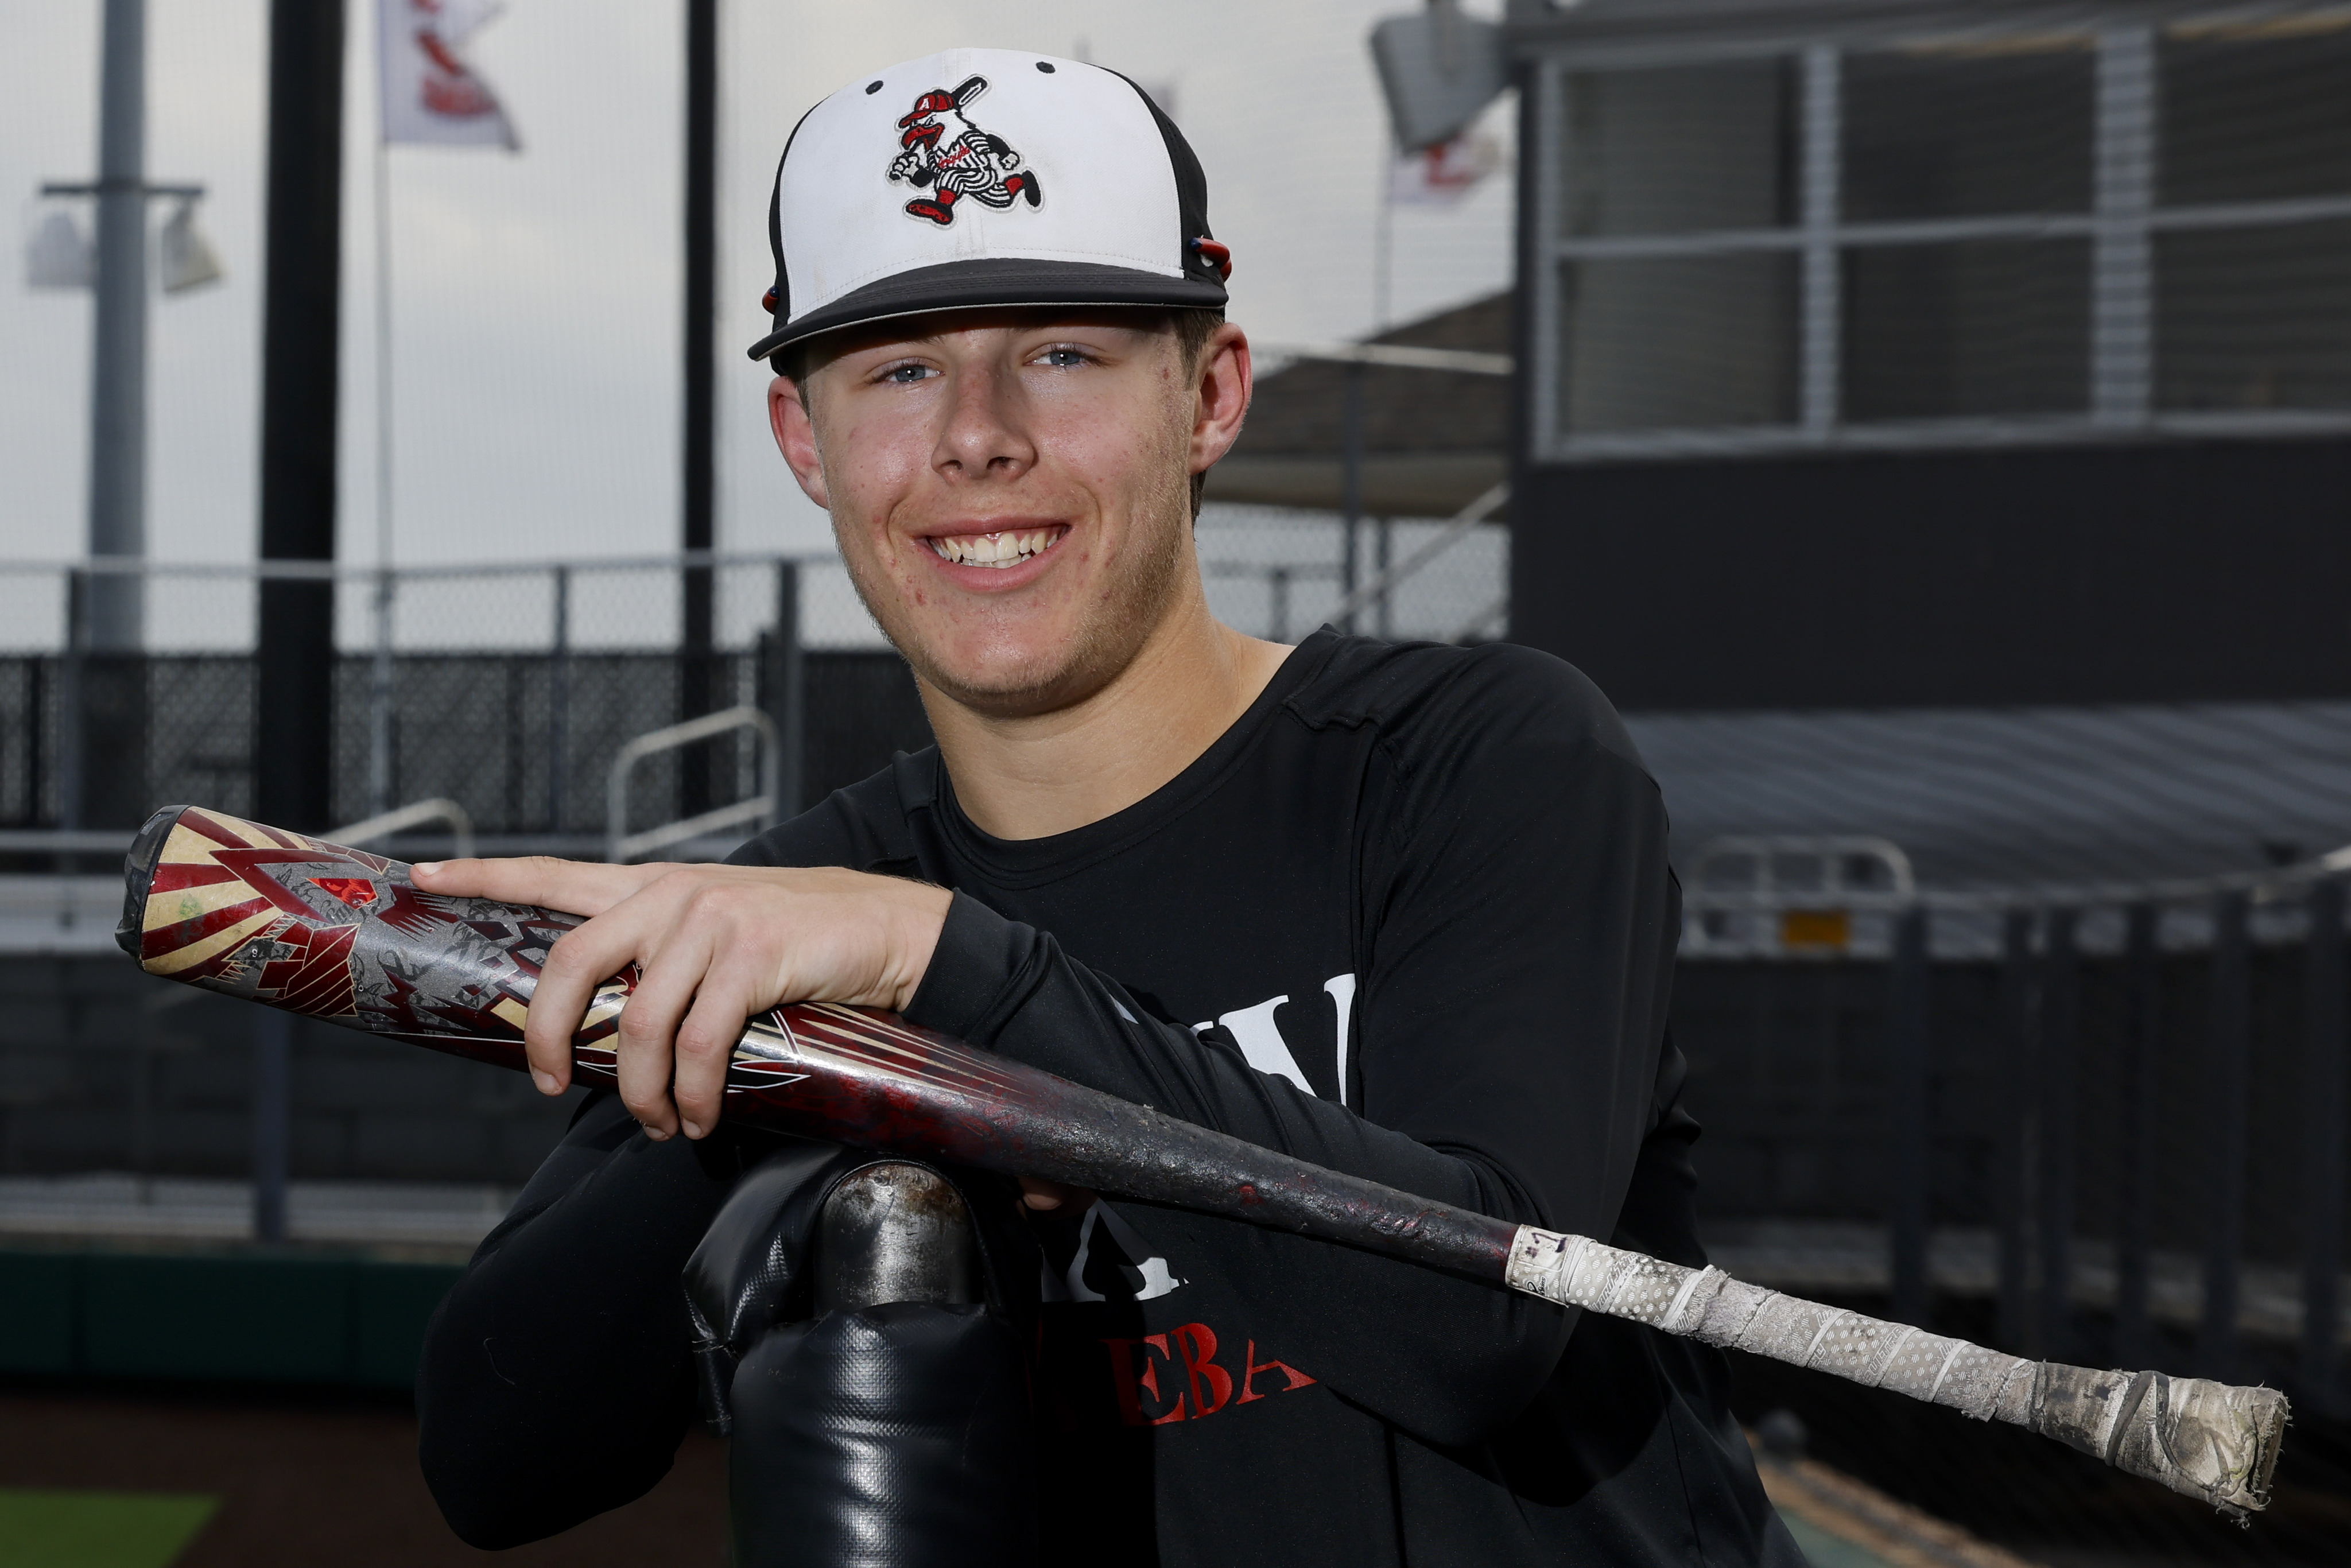 Colleyville shortstop Bobby Witt Jr. could become D-FW's greatest